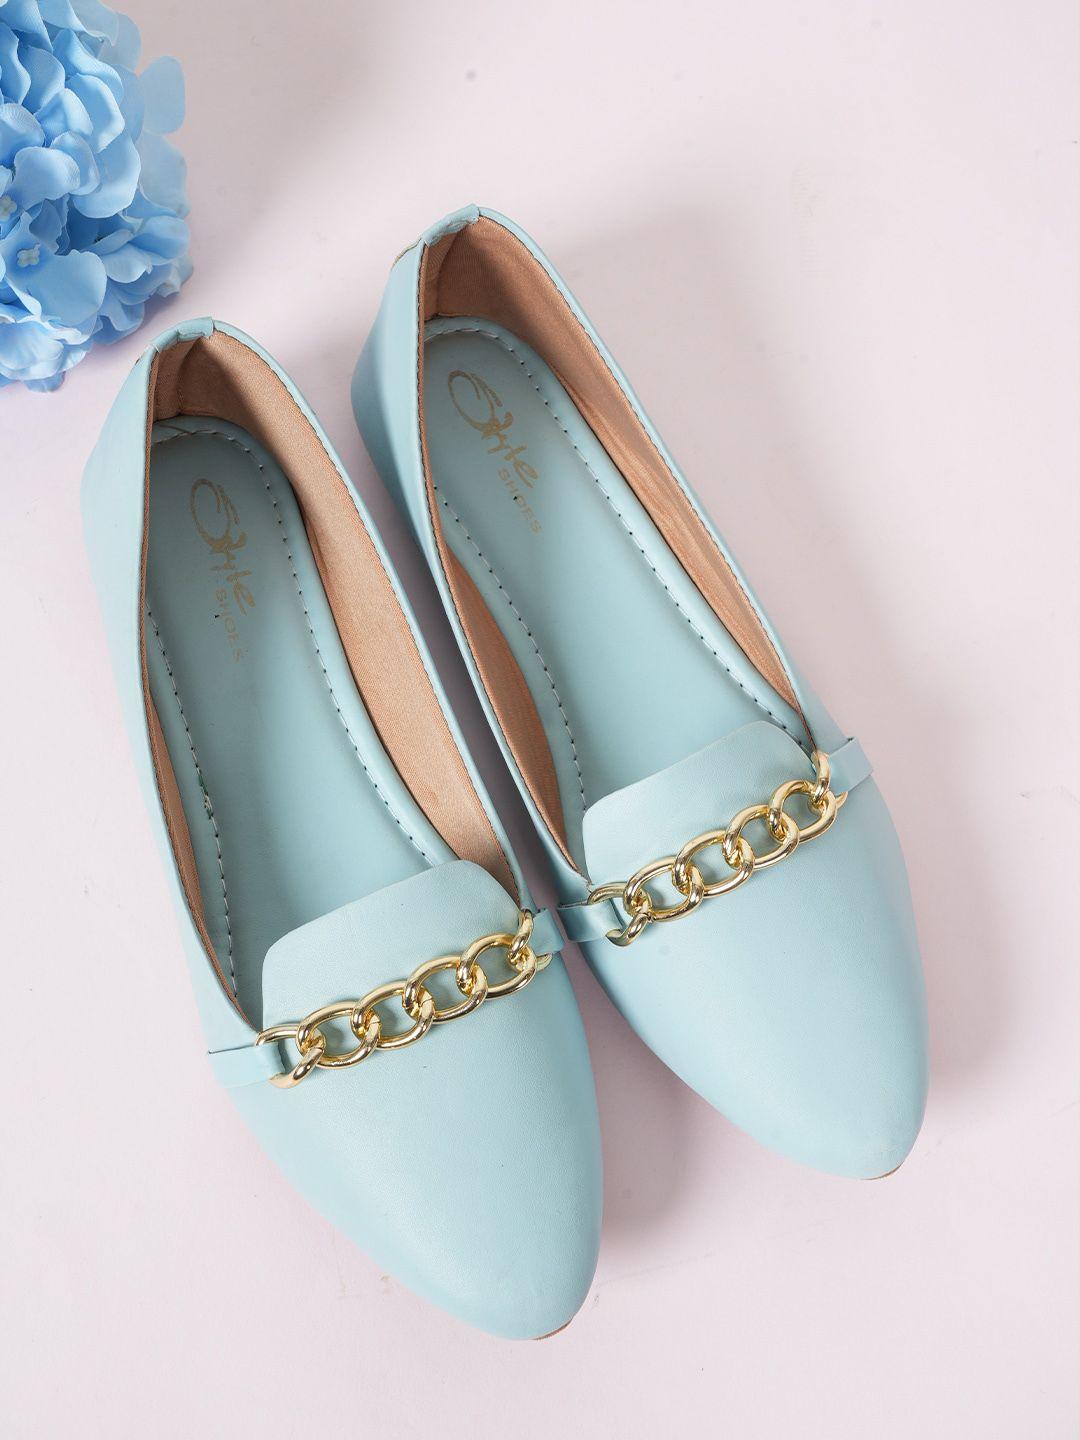 style shoes pointed toe embellished ballerinas